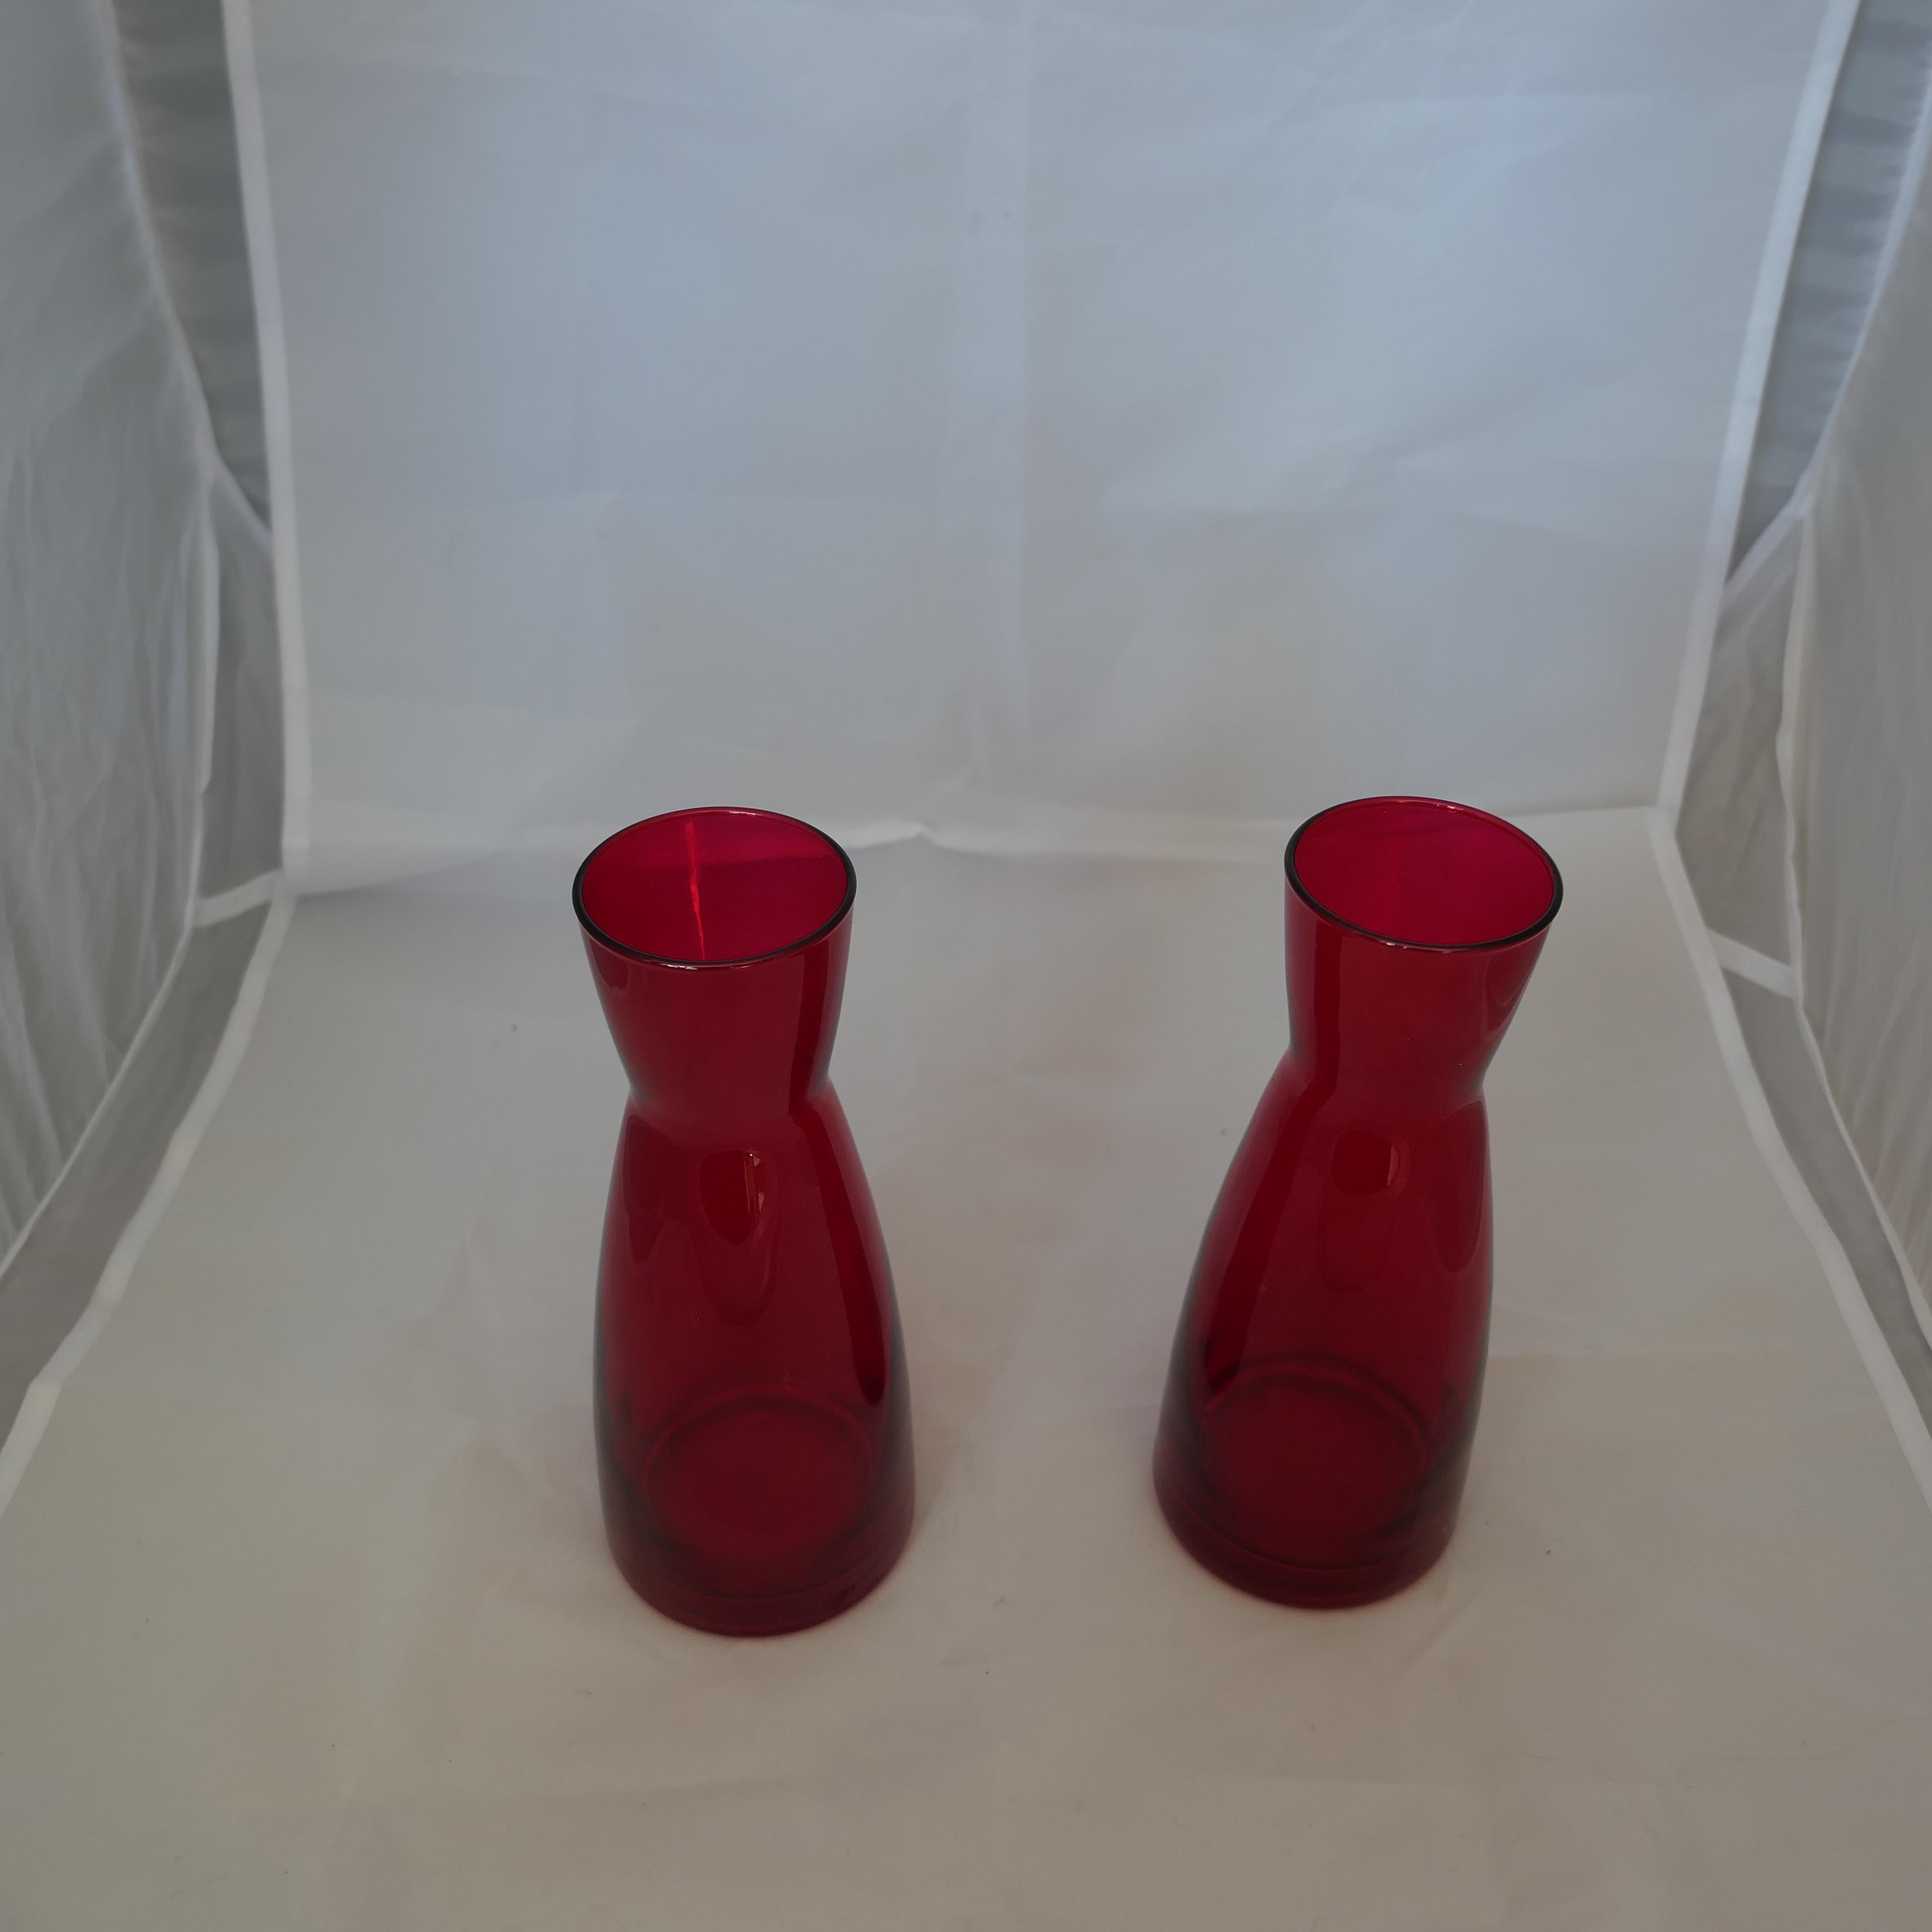 A Pair of Ypsilon Red Glass Carafes by Bormioli Rocco     For Sale 1